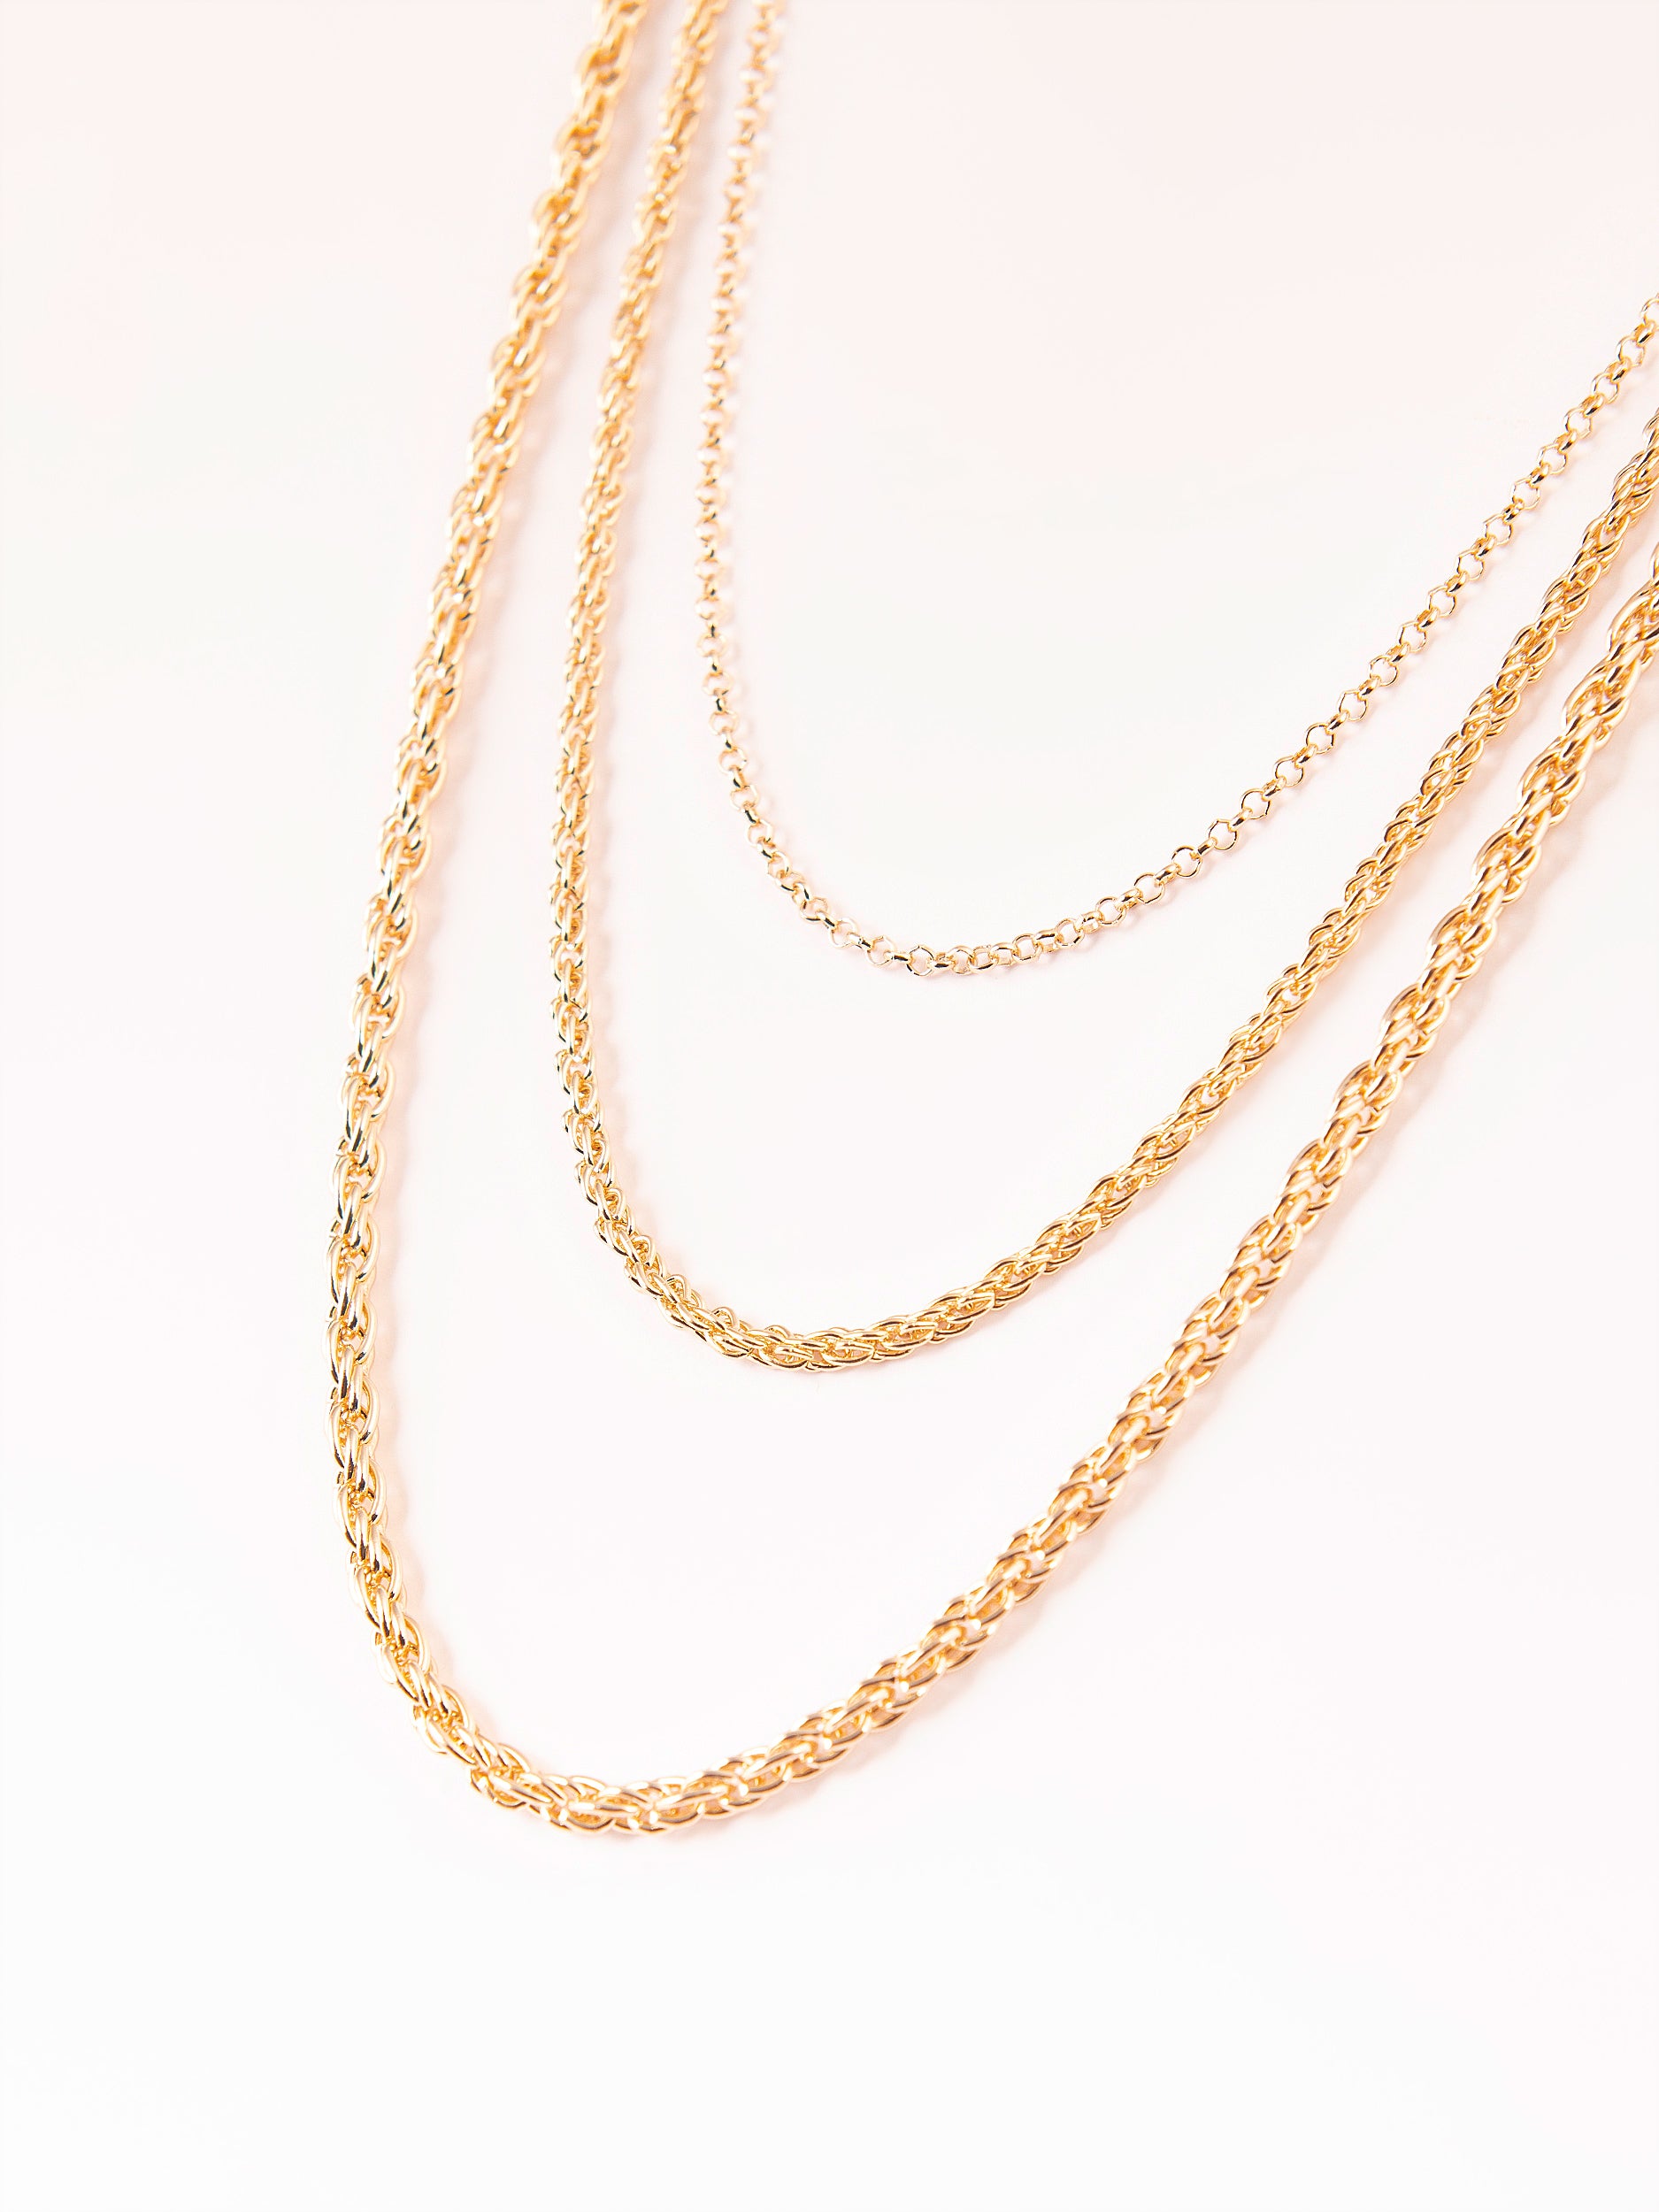 golden-layered-necklace